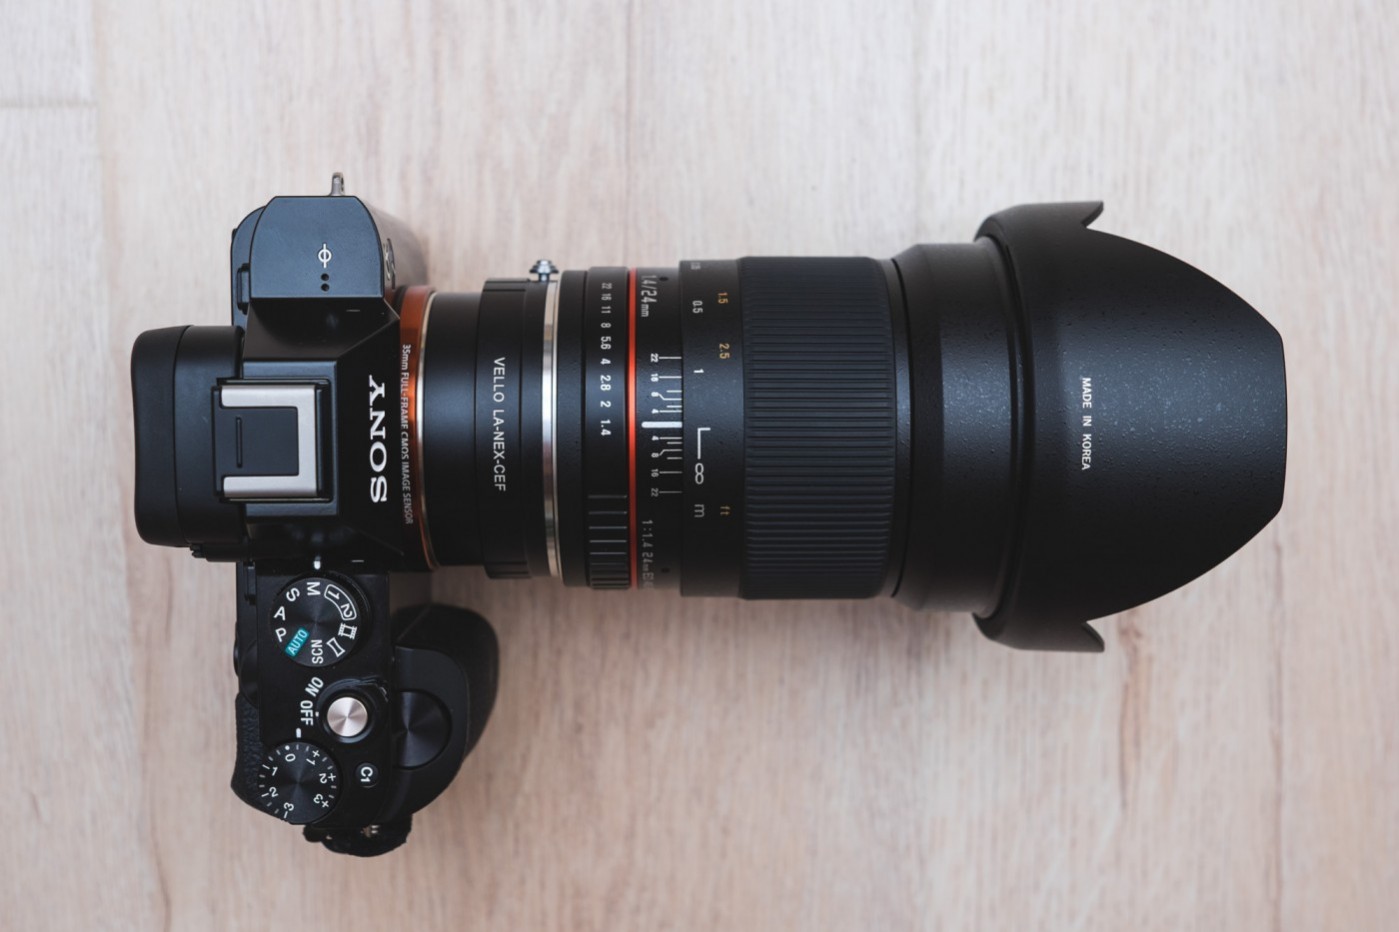 The Sony a7S mounted with the Rokinon 24mm f/1.4 Lens